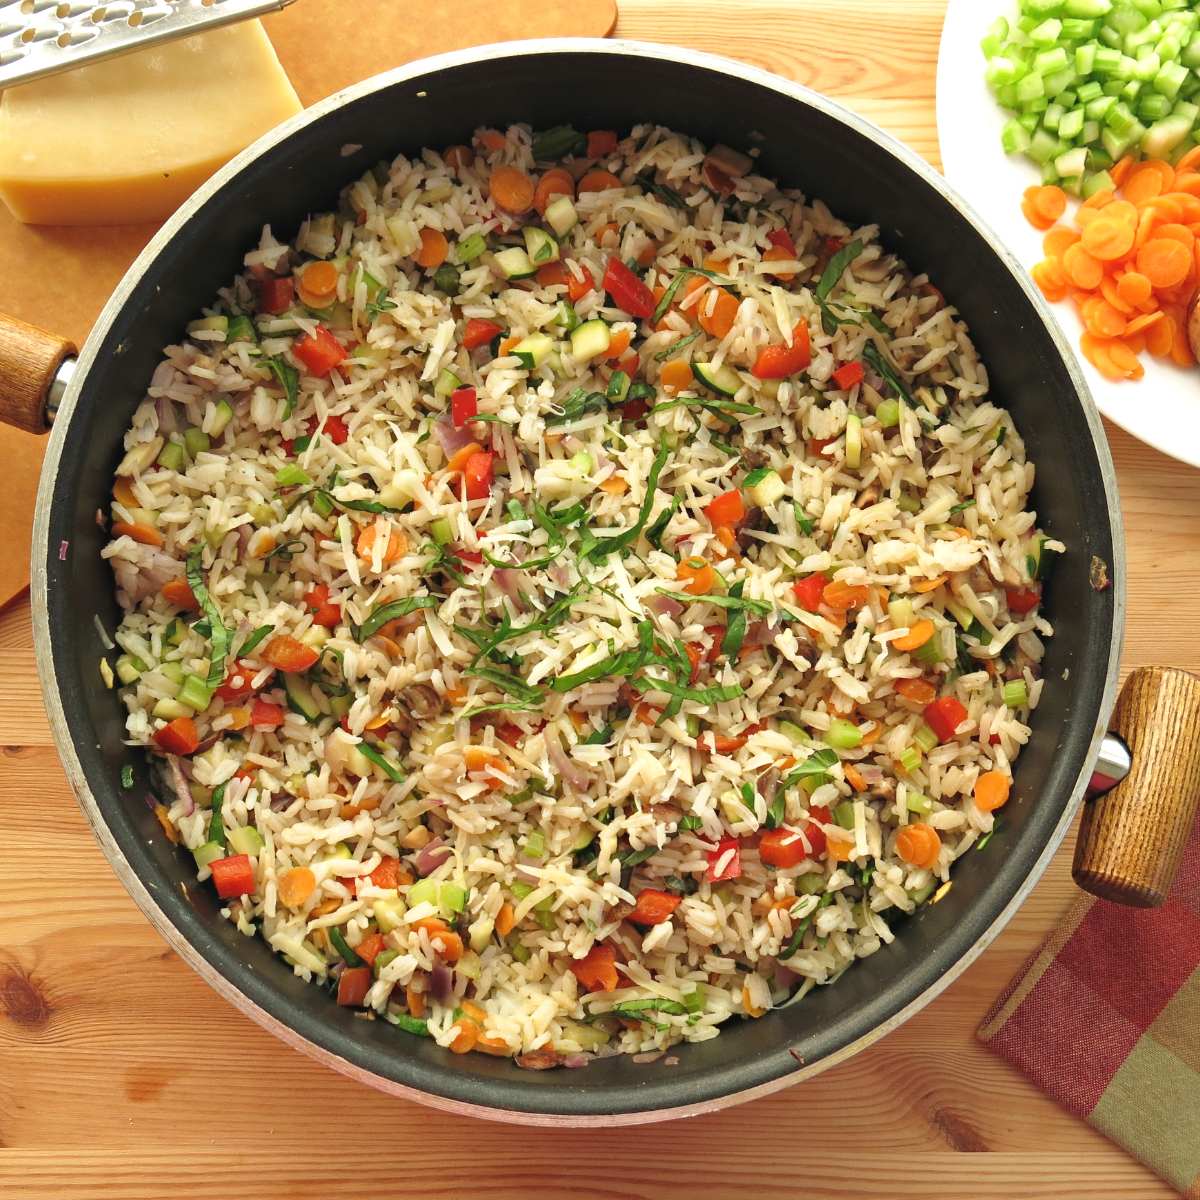 Vegetable rice pilaf in a skillet with carrots and celery next to it.